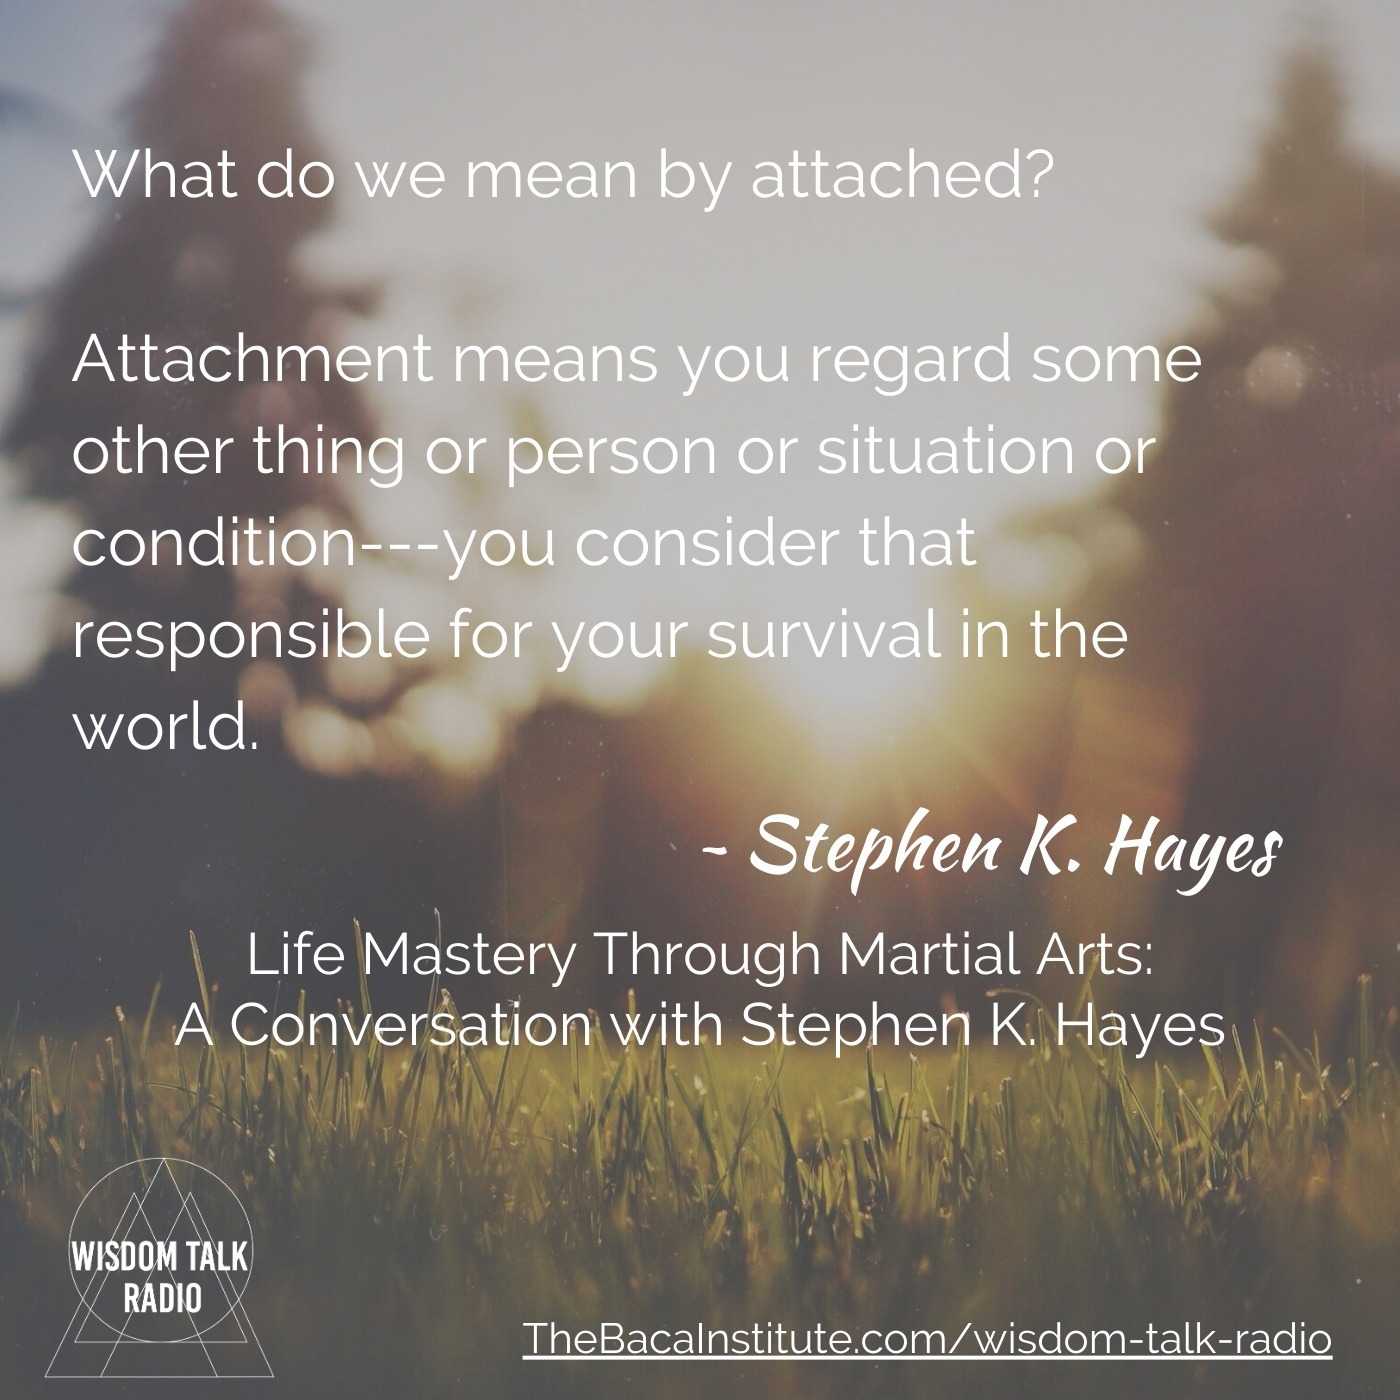 Life Mastery Through Martial Arts: a Conversation with Stephen K. Hayes